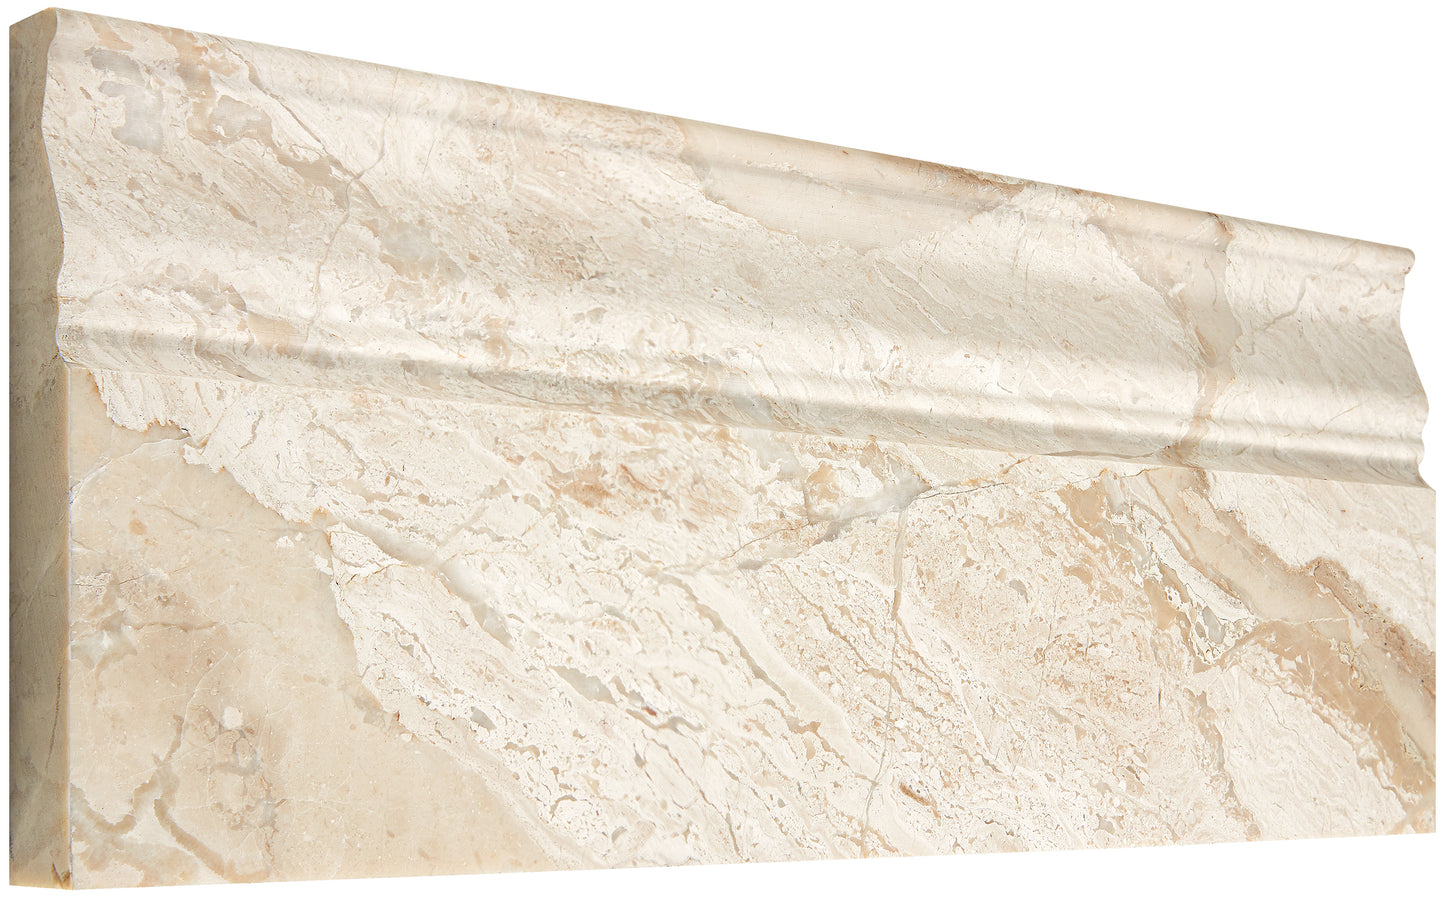 Diano Royal (Queen Beige) Marble 4-3/4" X 12" X 3/4" Baseboard Trim Polished/Honed